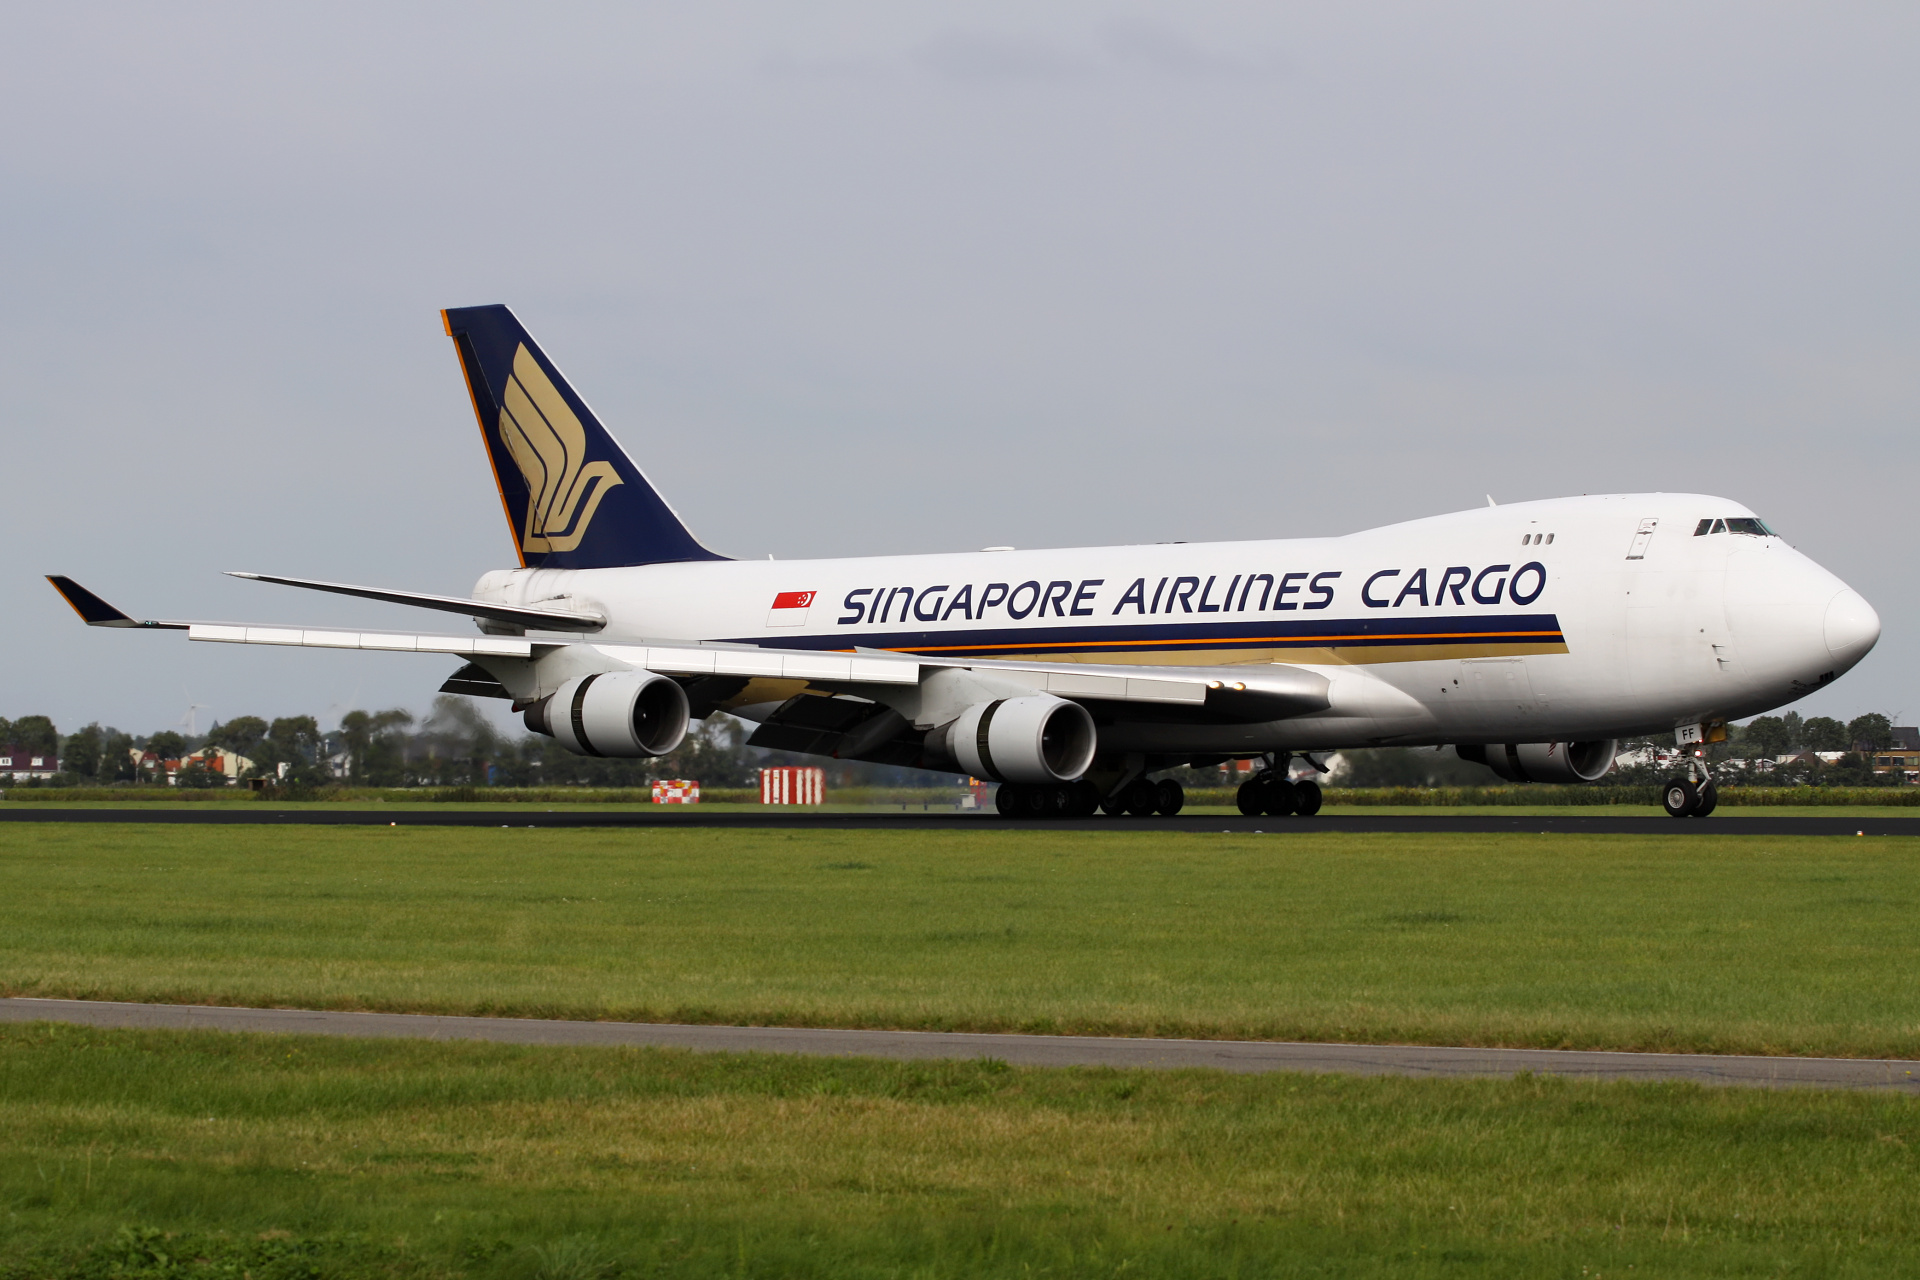 9V-SFF, Singapore Airlines Cargo (Aircraft » Schiphol Spotting » Boeing 747-400F)